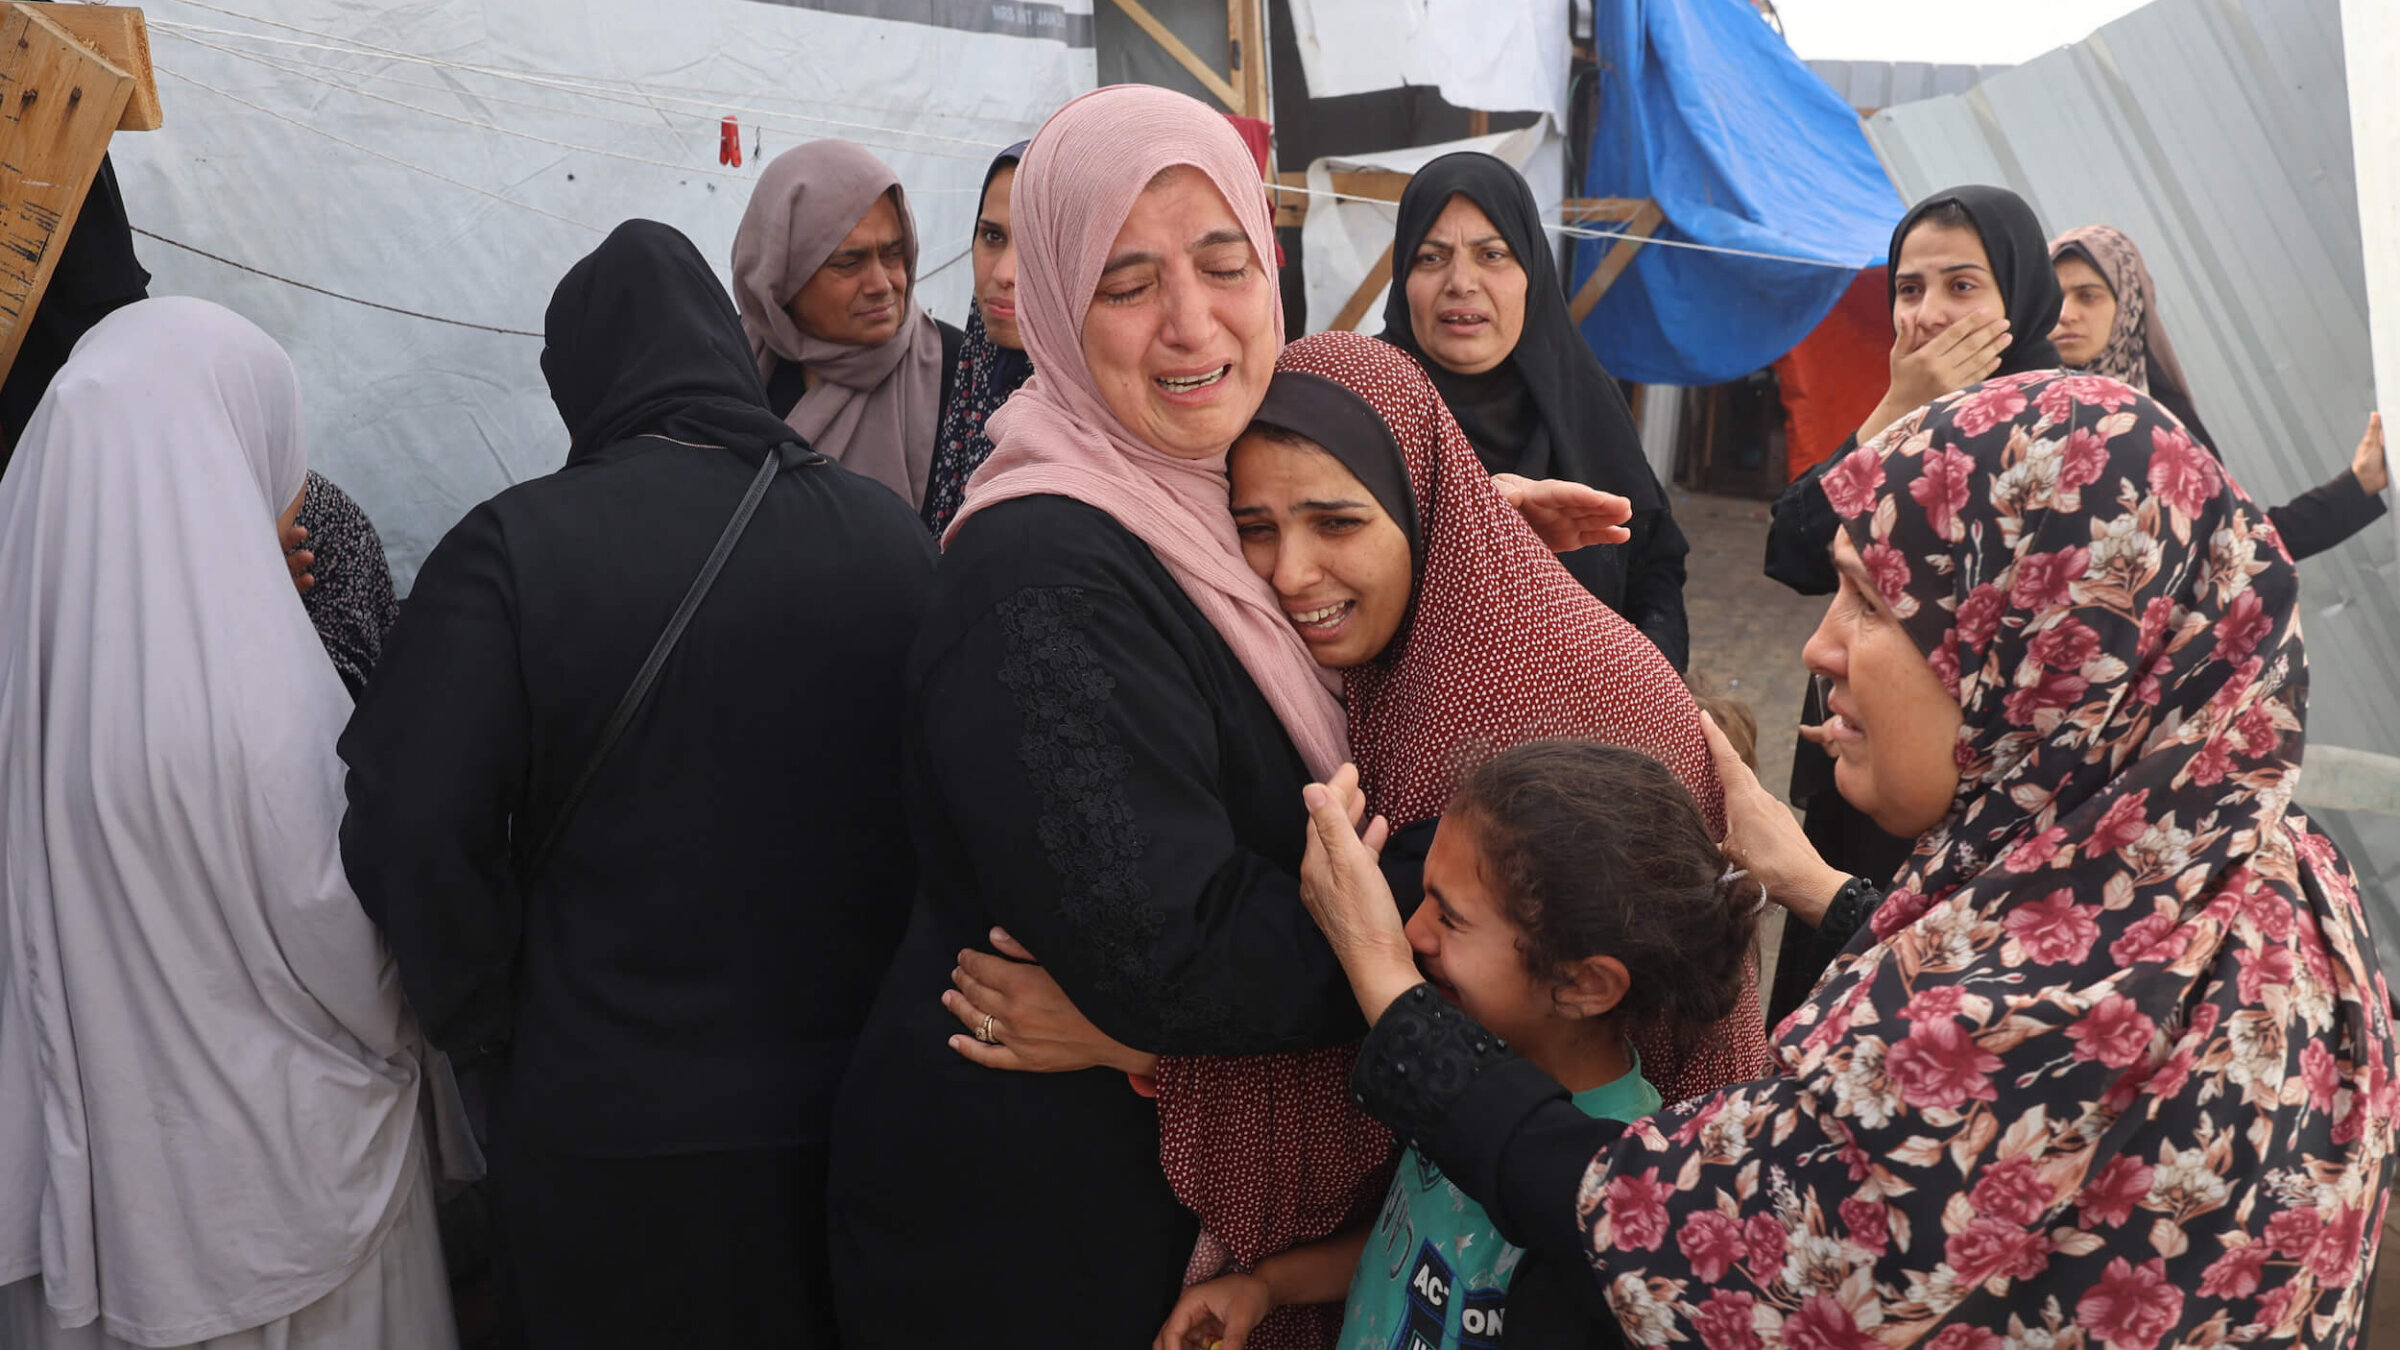 Palestinians mourn after an Israeli strike on a camp for internally displaced people in Rafah, Gaza, killed at least 45 people.